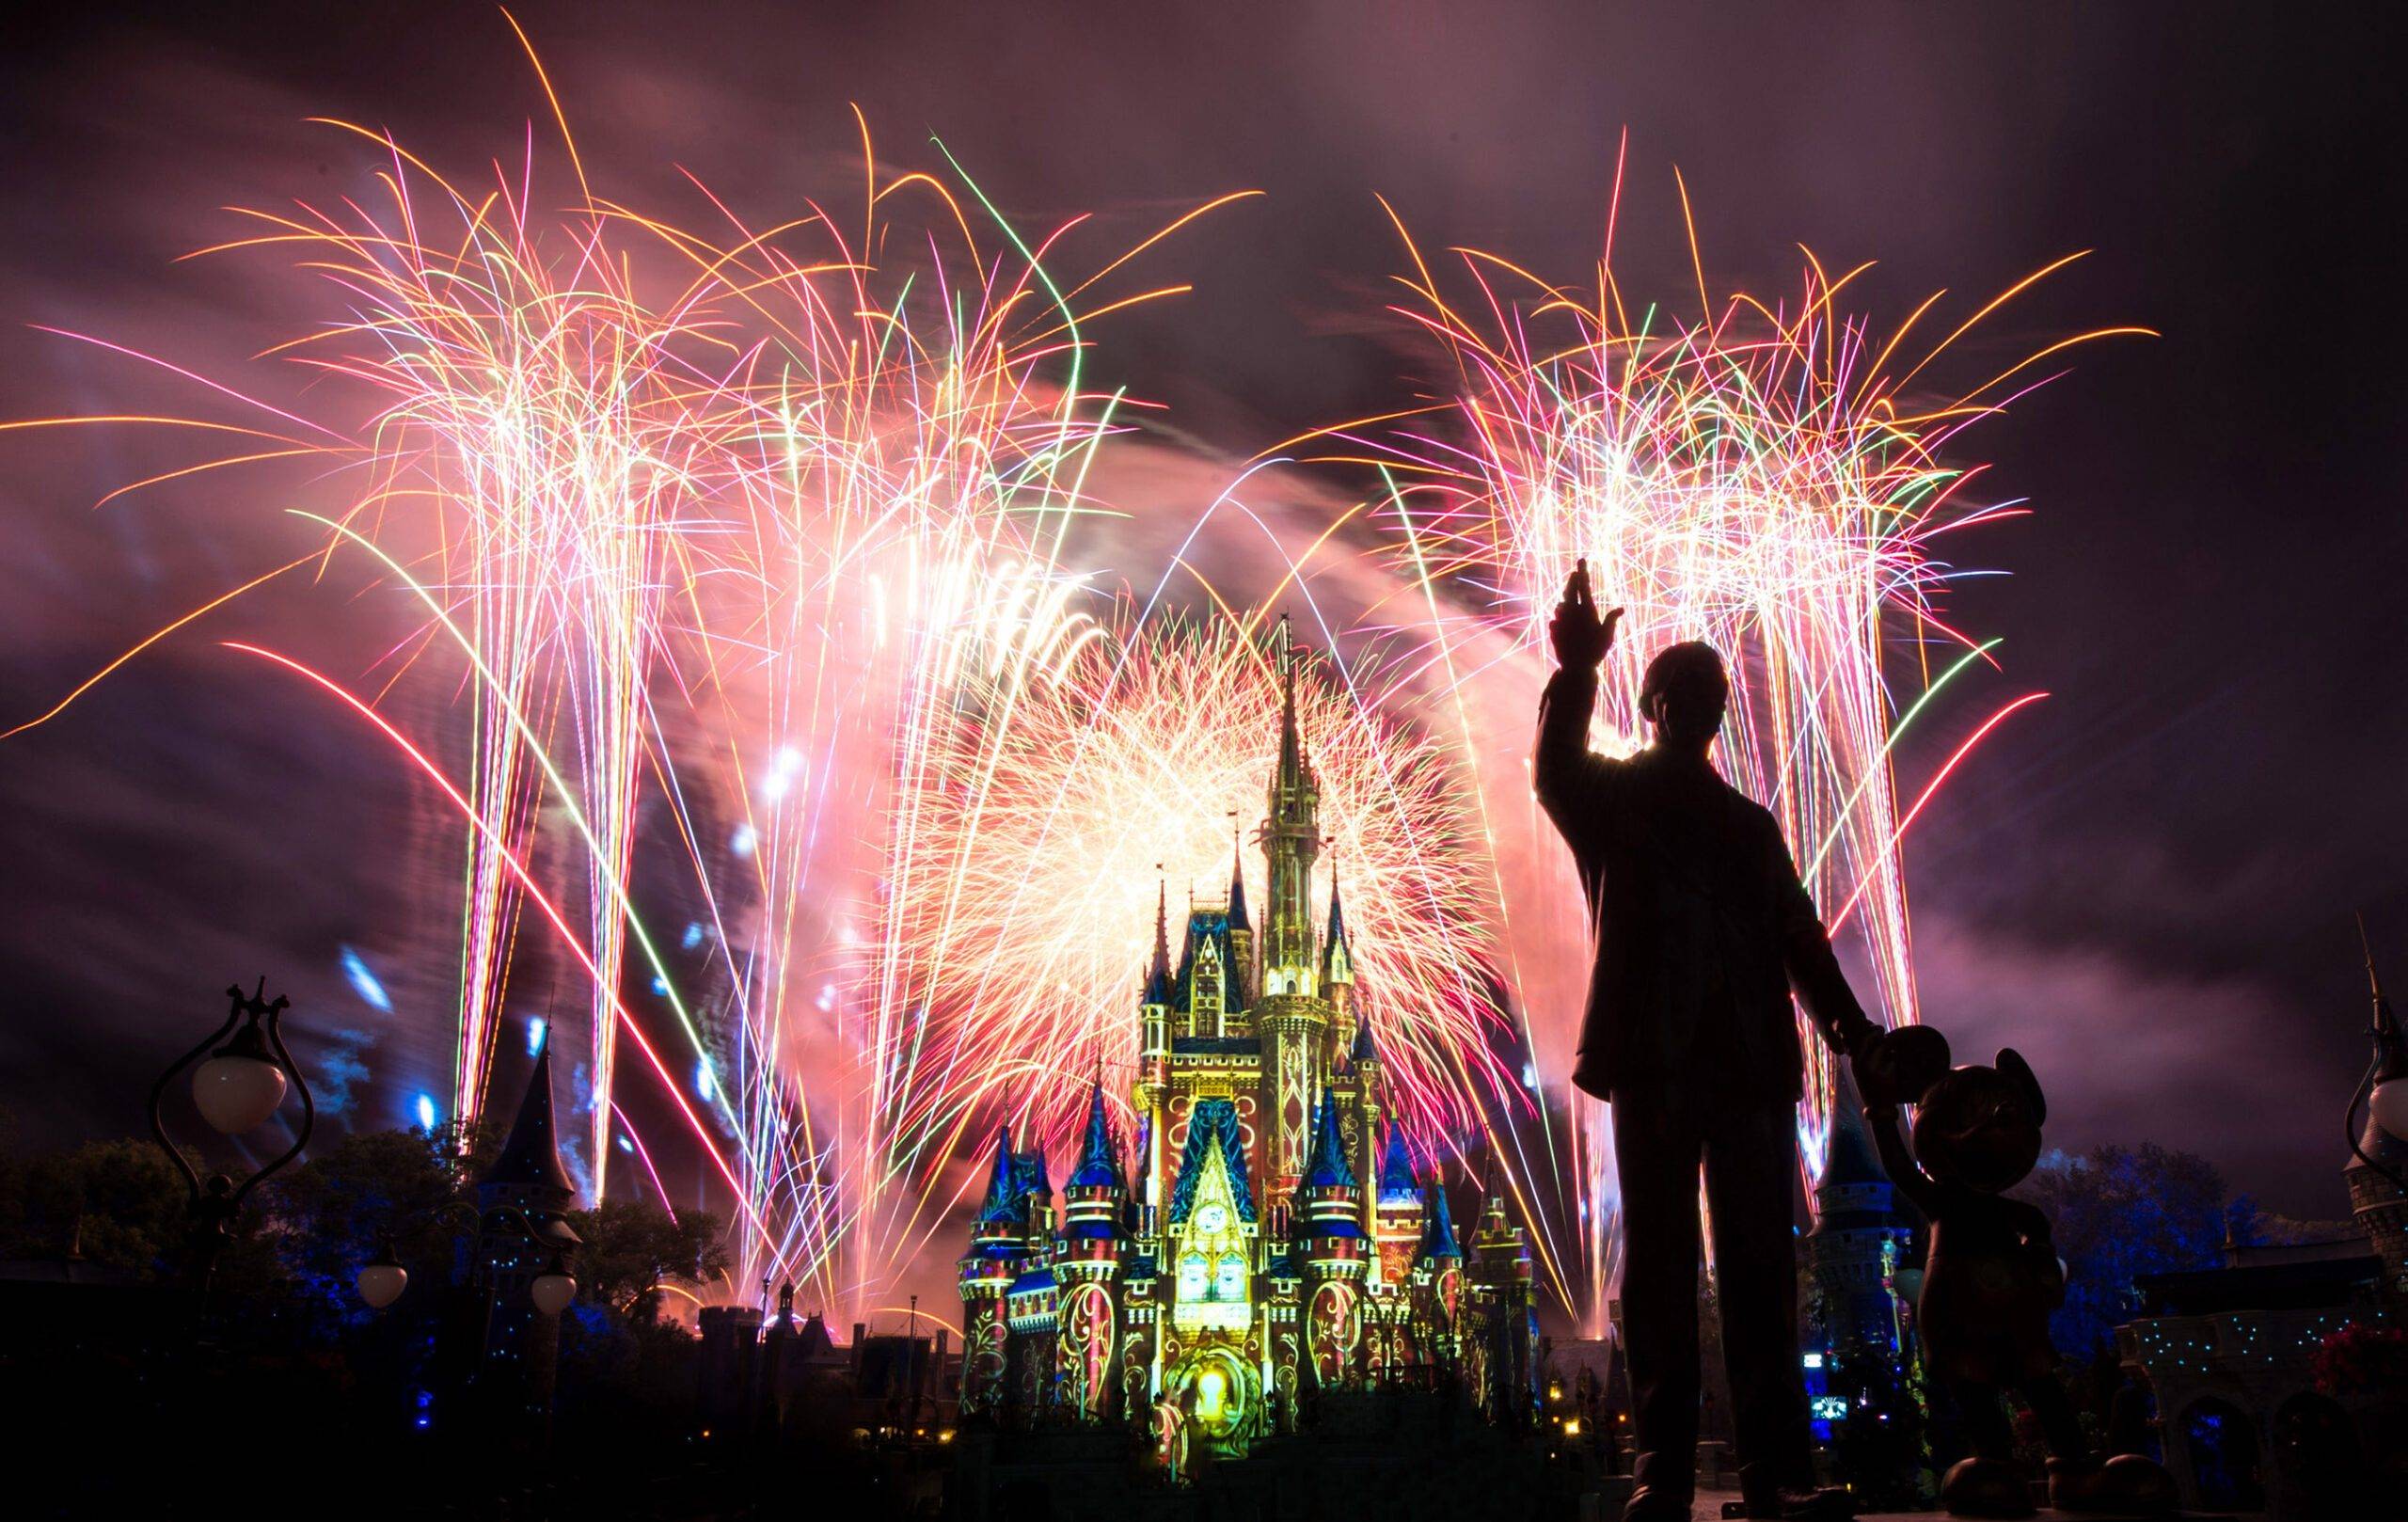 Happily Ever After returns on April 3